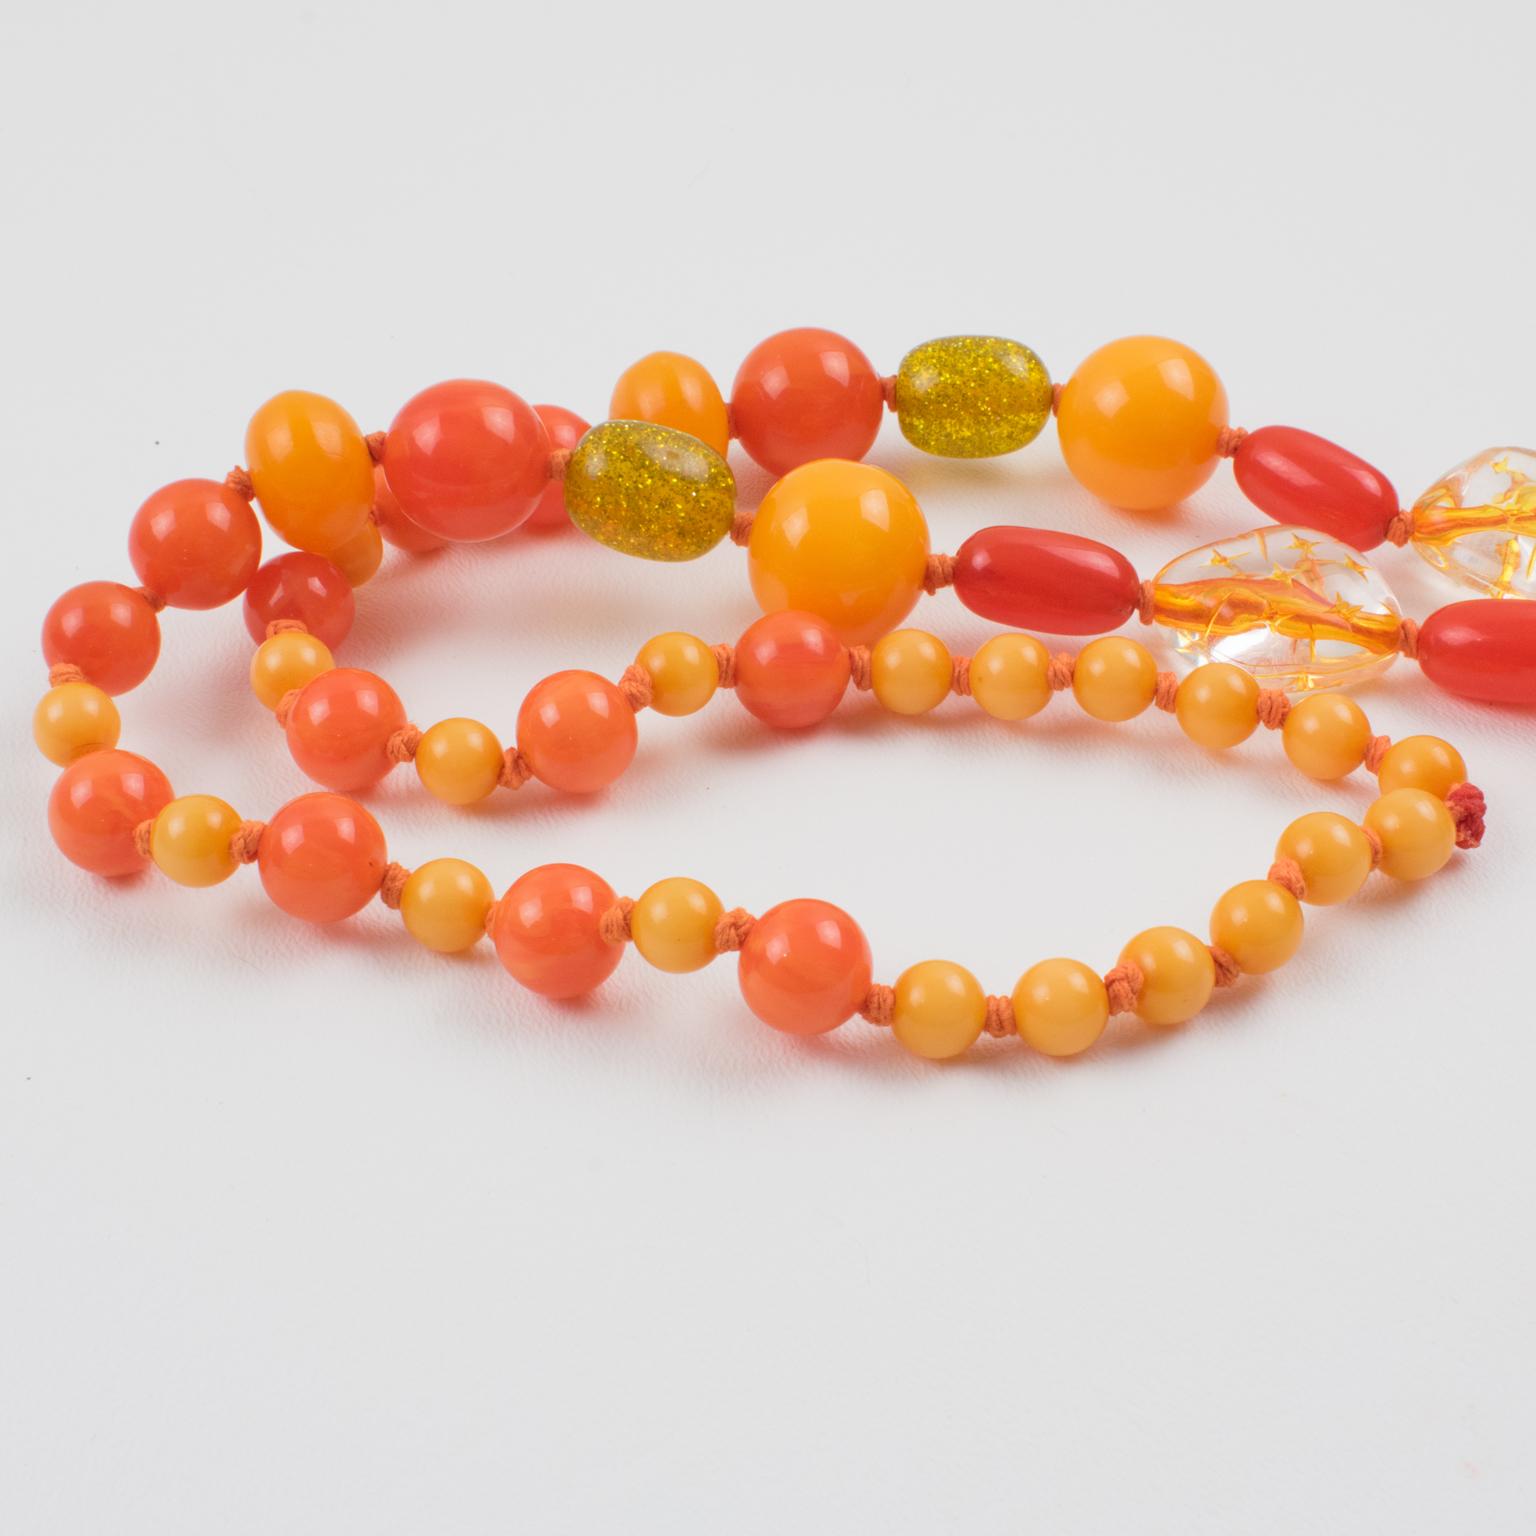 Bakelite and Lucite Long Necklace Sunny Yellow and Orange Colors For Sale 2